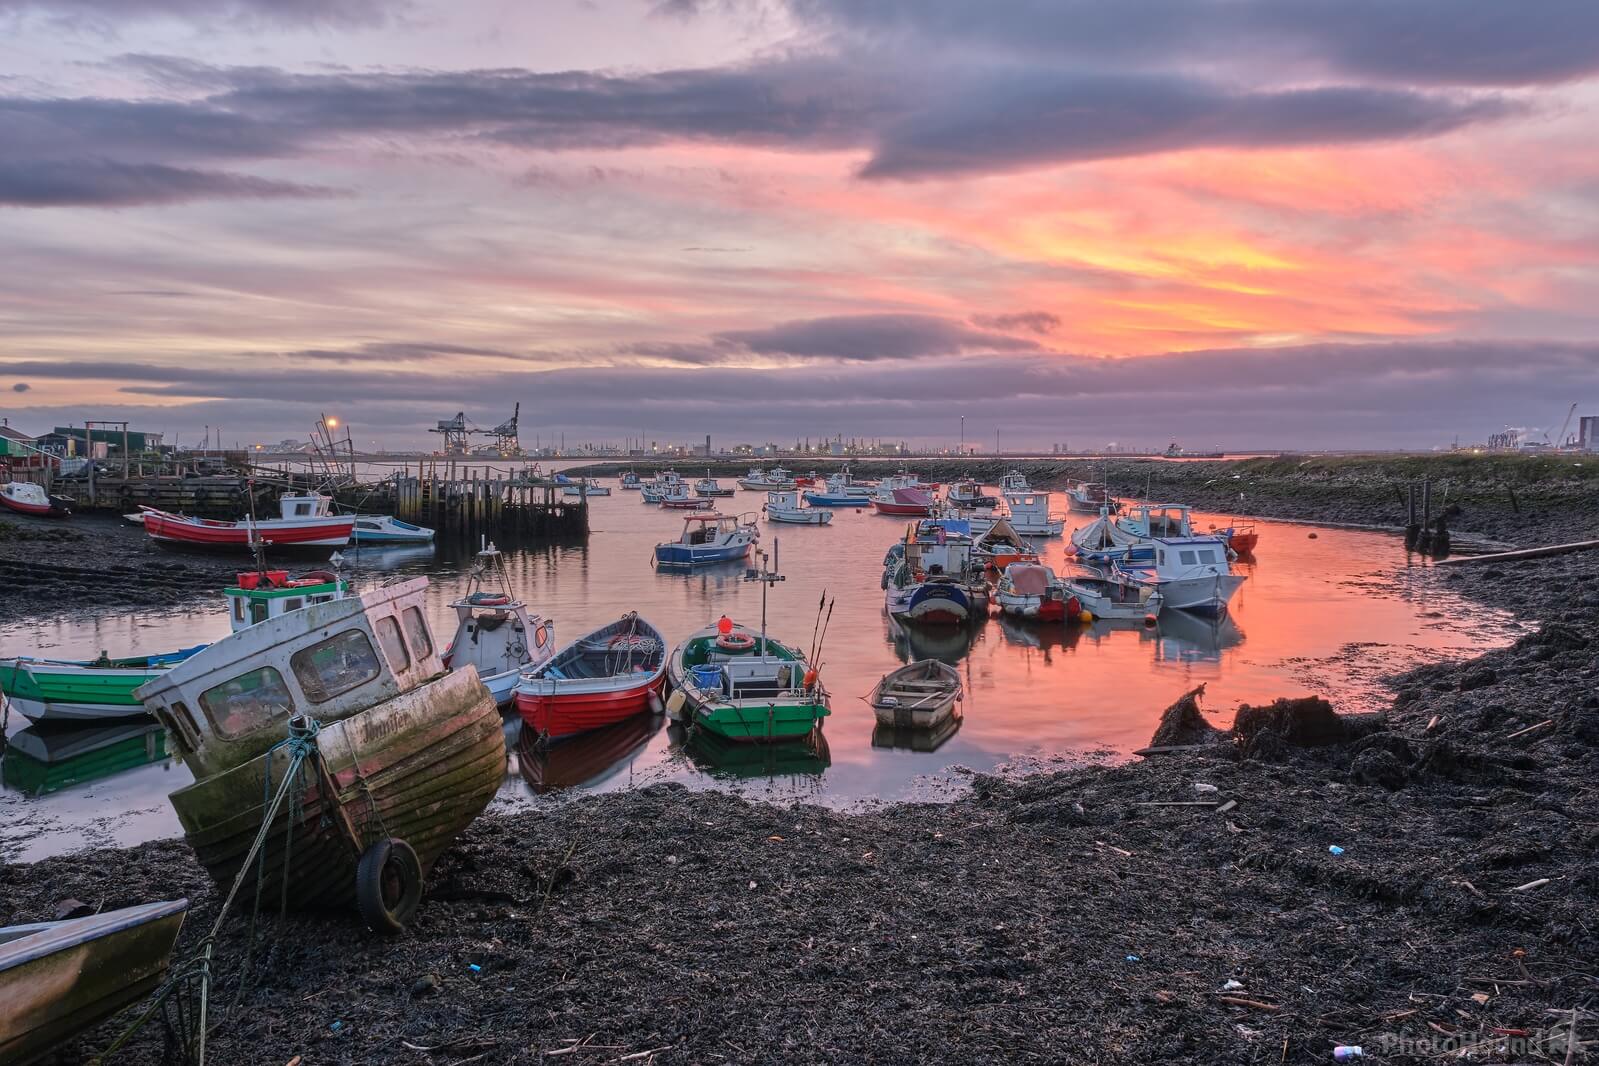 Image of South Gare by Gary Calland